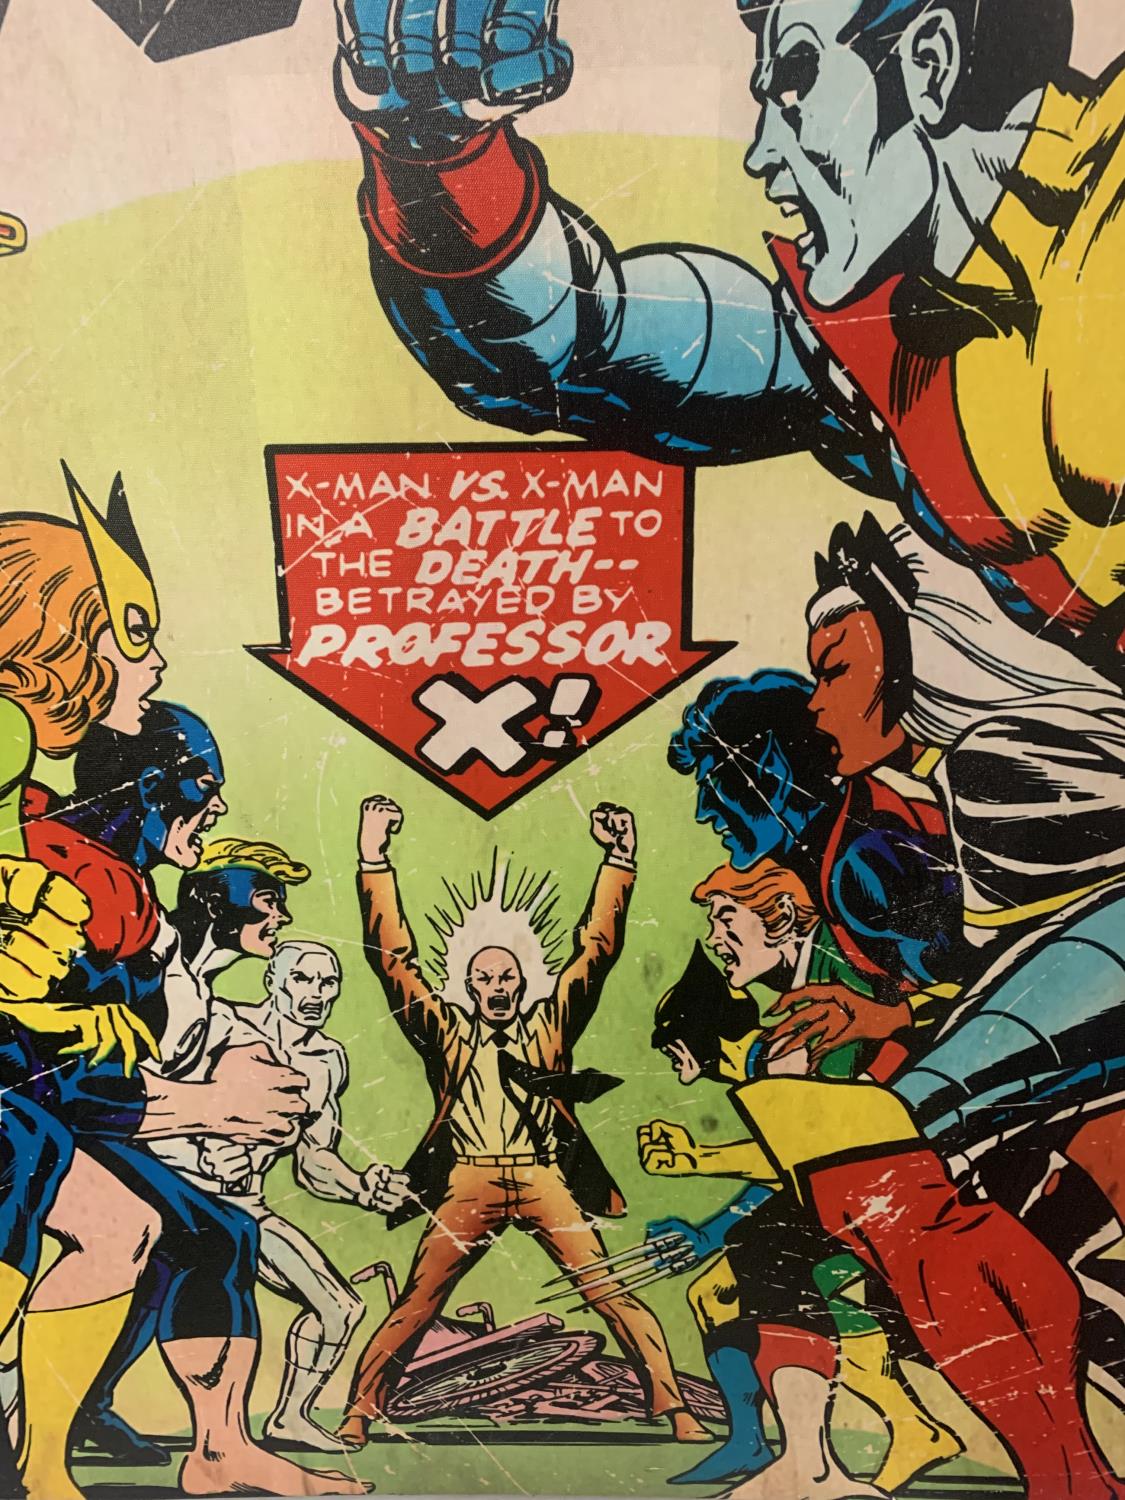 A LARGE XMEN COMIC STYLE CANVAS - Image 6 of 6